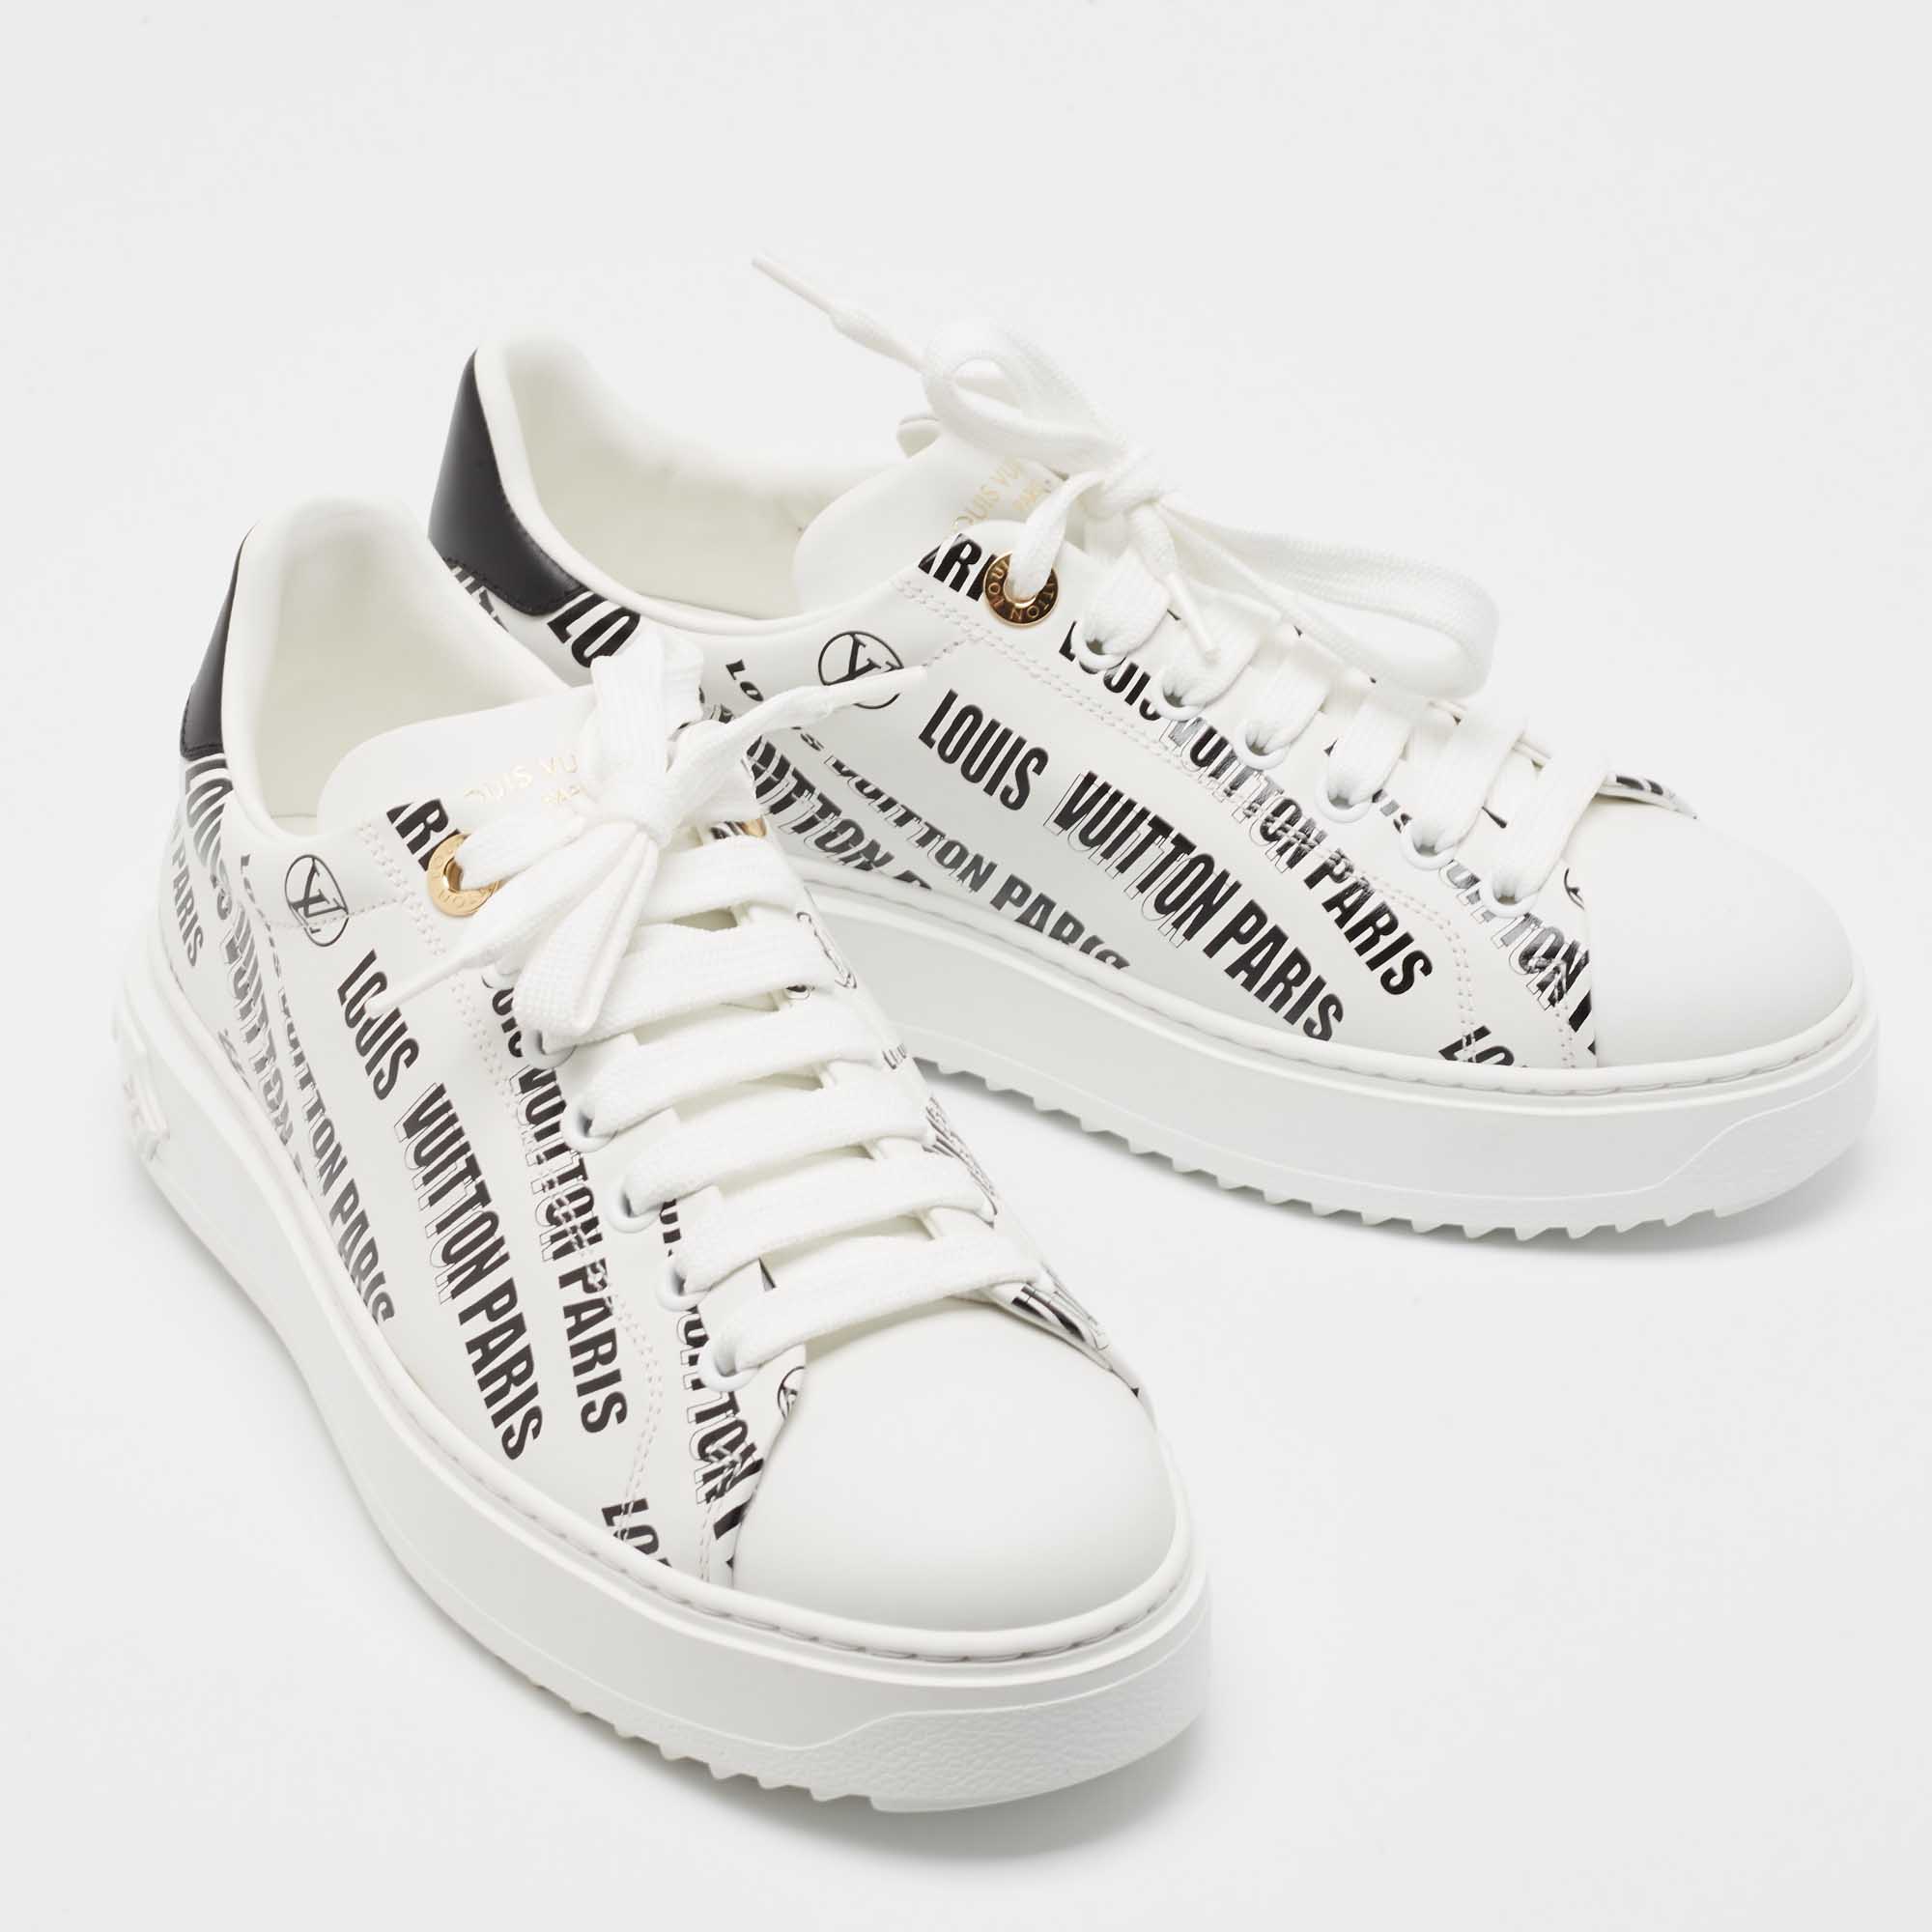 Louis Vuitton White/Black Leather Logo Printed Time Out Sneakers Size 37.5